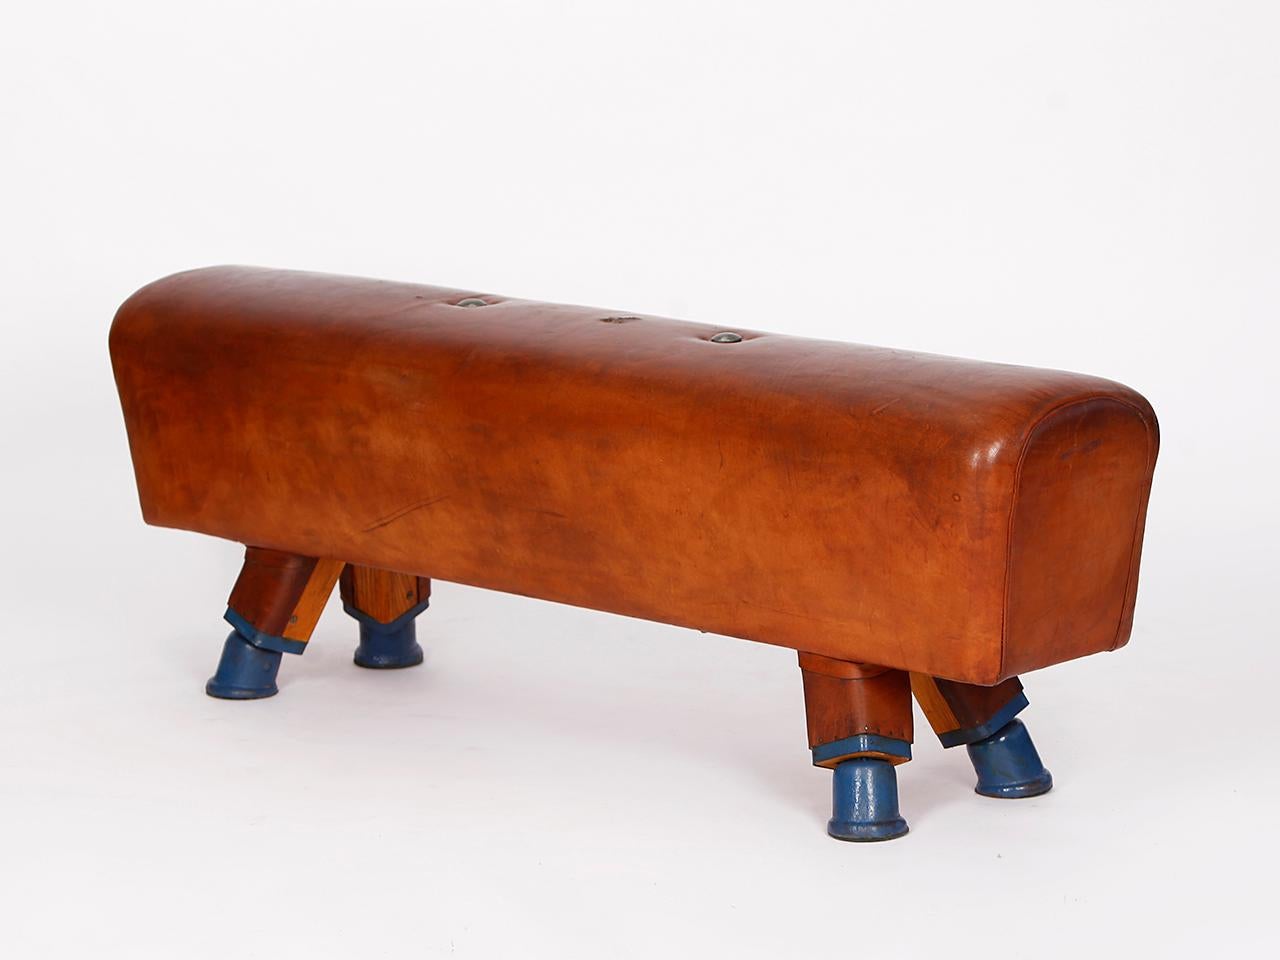 Pommel horse from former Czechoslovakia from the 1930s with beautiful patina, shortened to bench height 55cm and very good vintage condition. Completely restored. The iron feet are preserved. The thick leather has been cleaned and preserved. All of